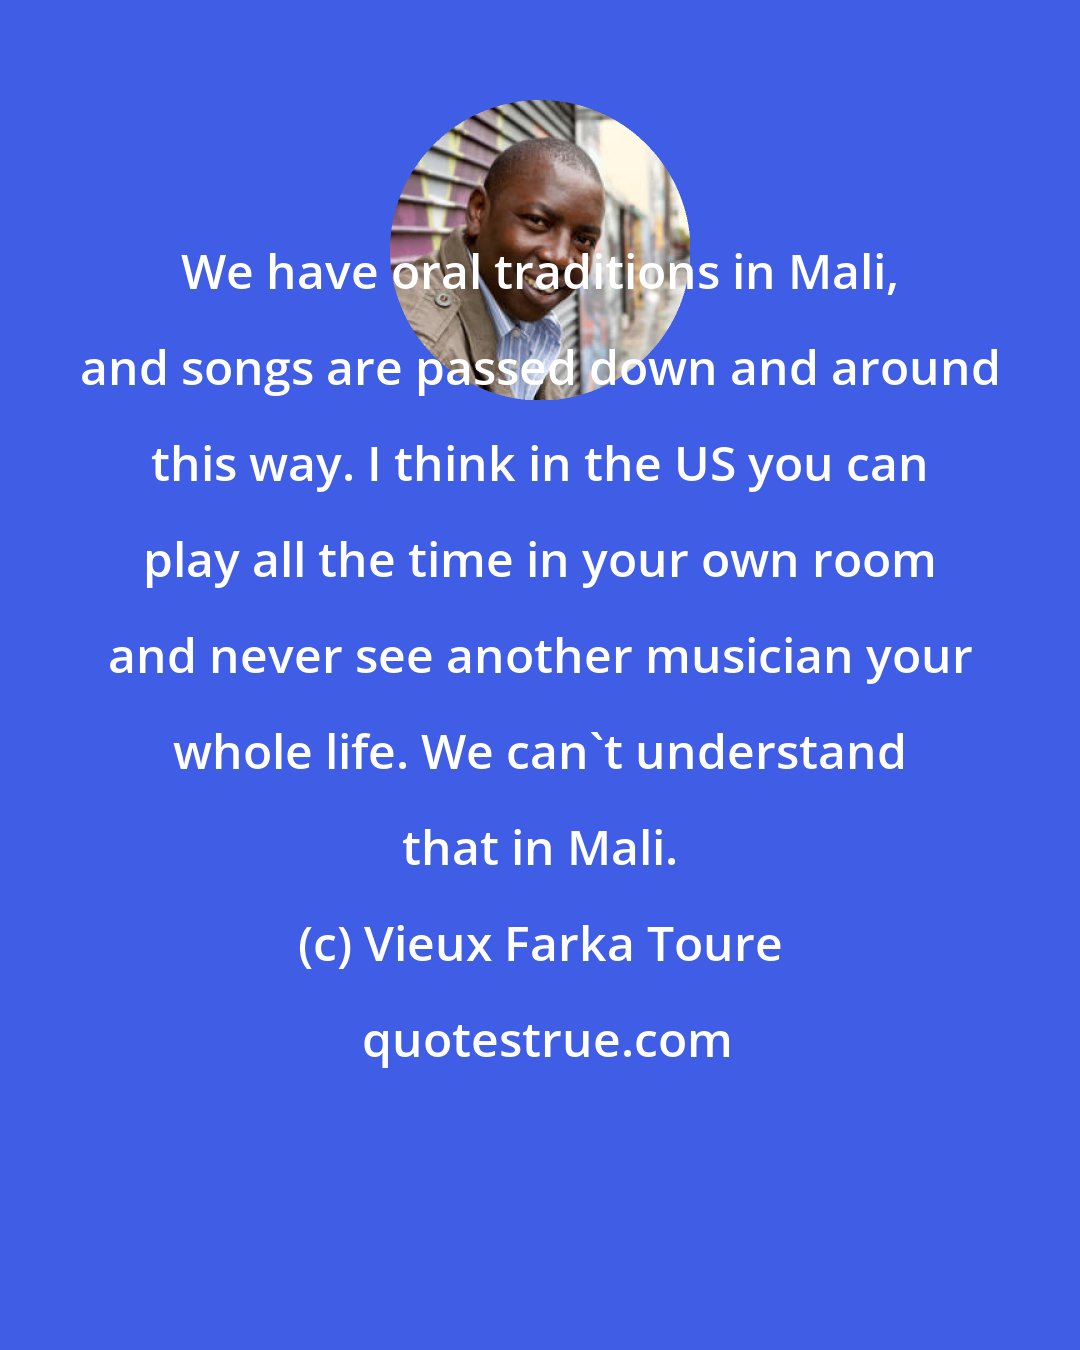 Vieux Farka Toure: We have oral traditions in Mali, and songs are passed down and around this way. I think in the US you can play all the time in your own room and never see another musician your whole life. We can't understand that in Mali.